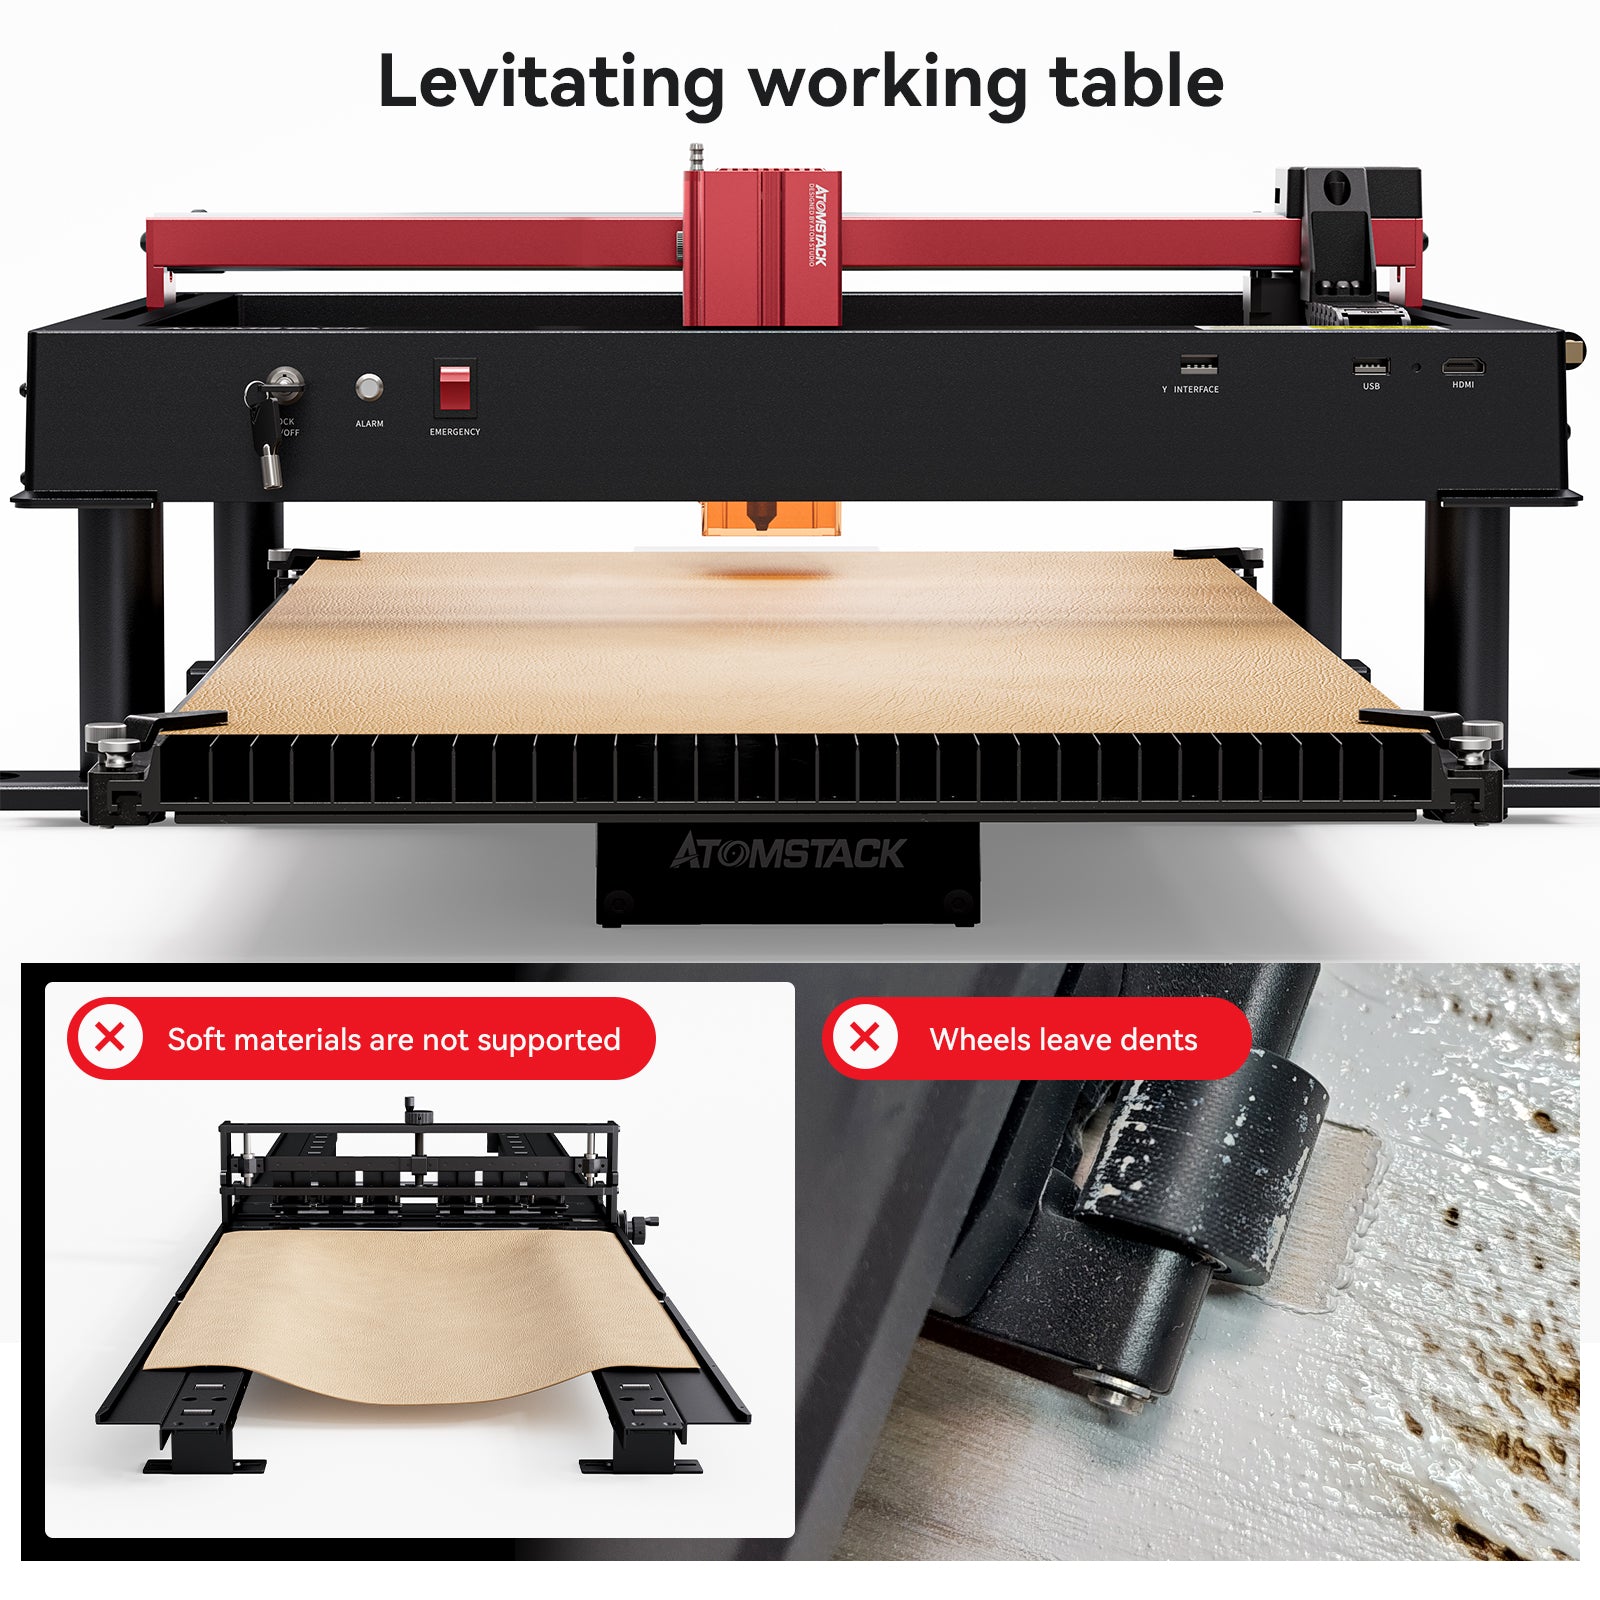 AtomStack R5 Automatic Conveyor Feeder For A6 PRO A12 PRO X12 PRO A24 PRO X24 PRO A70 MAX X40 A40 PRO X30 X20 S20 PRO X7 PRO A10 S10 PRO Laser Engraving Cutting Machine